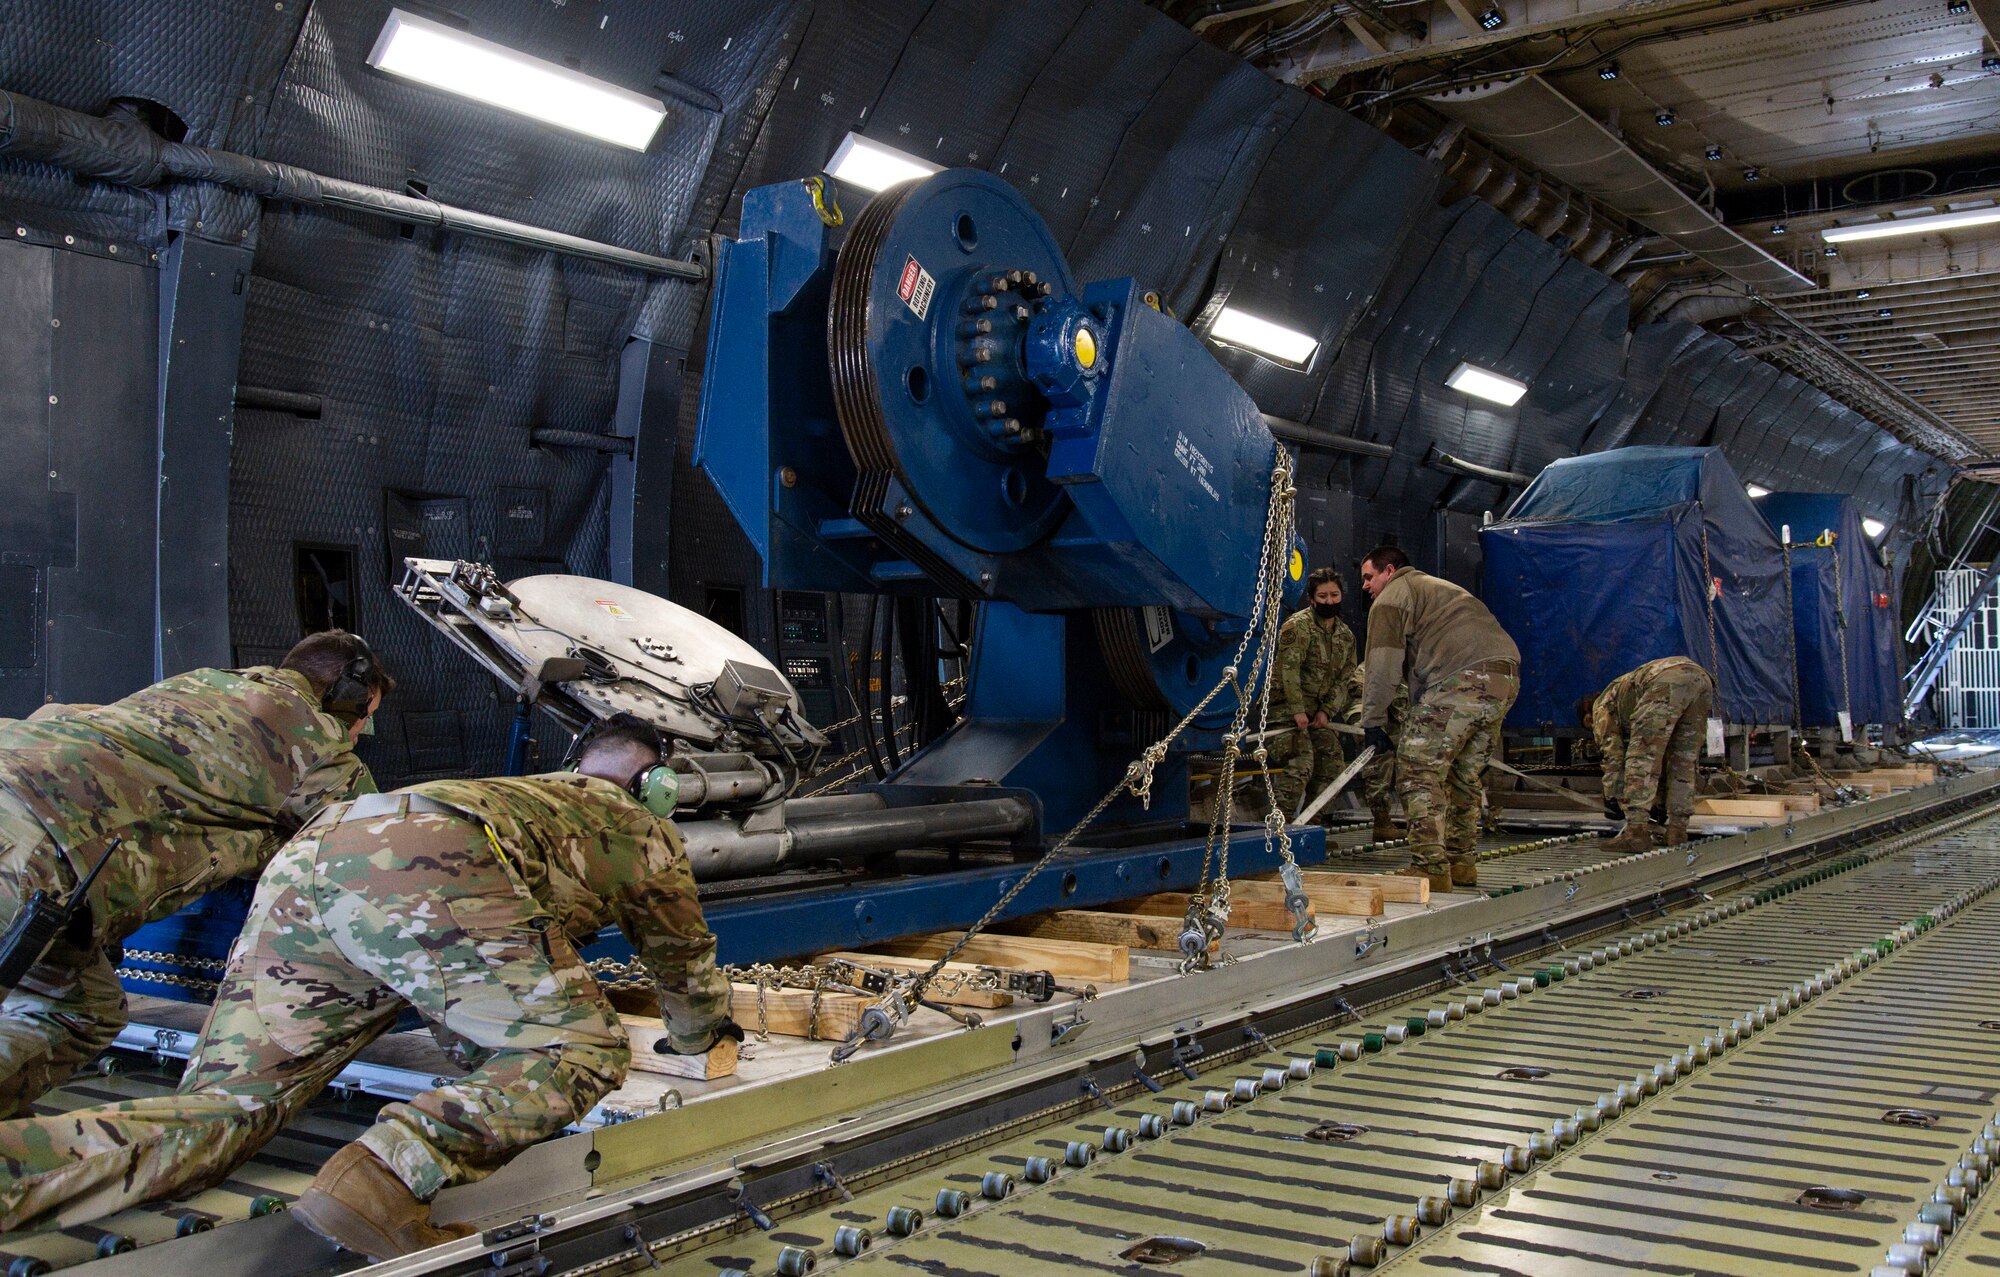 Loadmasters from the 9th Airlift Squadron along with 436th Aerial Port Squadron ramp services personnel, load cargo onto a C-5M Super Galaxy at Dover Air Force Base, Delaware, Feb. 8, 2022. The C-5M transported cargo owned by U.S. Navy Supervisor of Salvage and Diving (SUPSALV), Naval Sea Systems Command. (U.S. Air Force photo by Roland Balik)